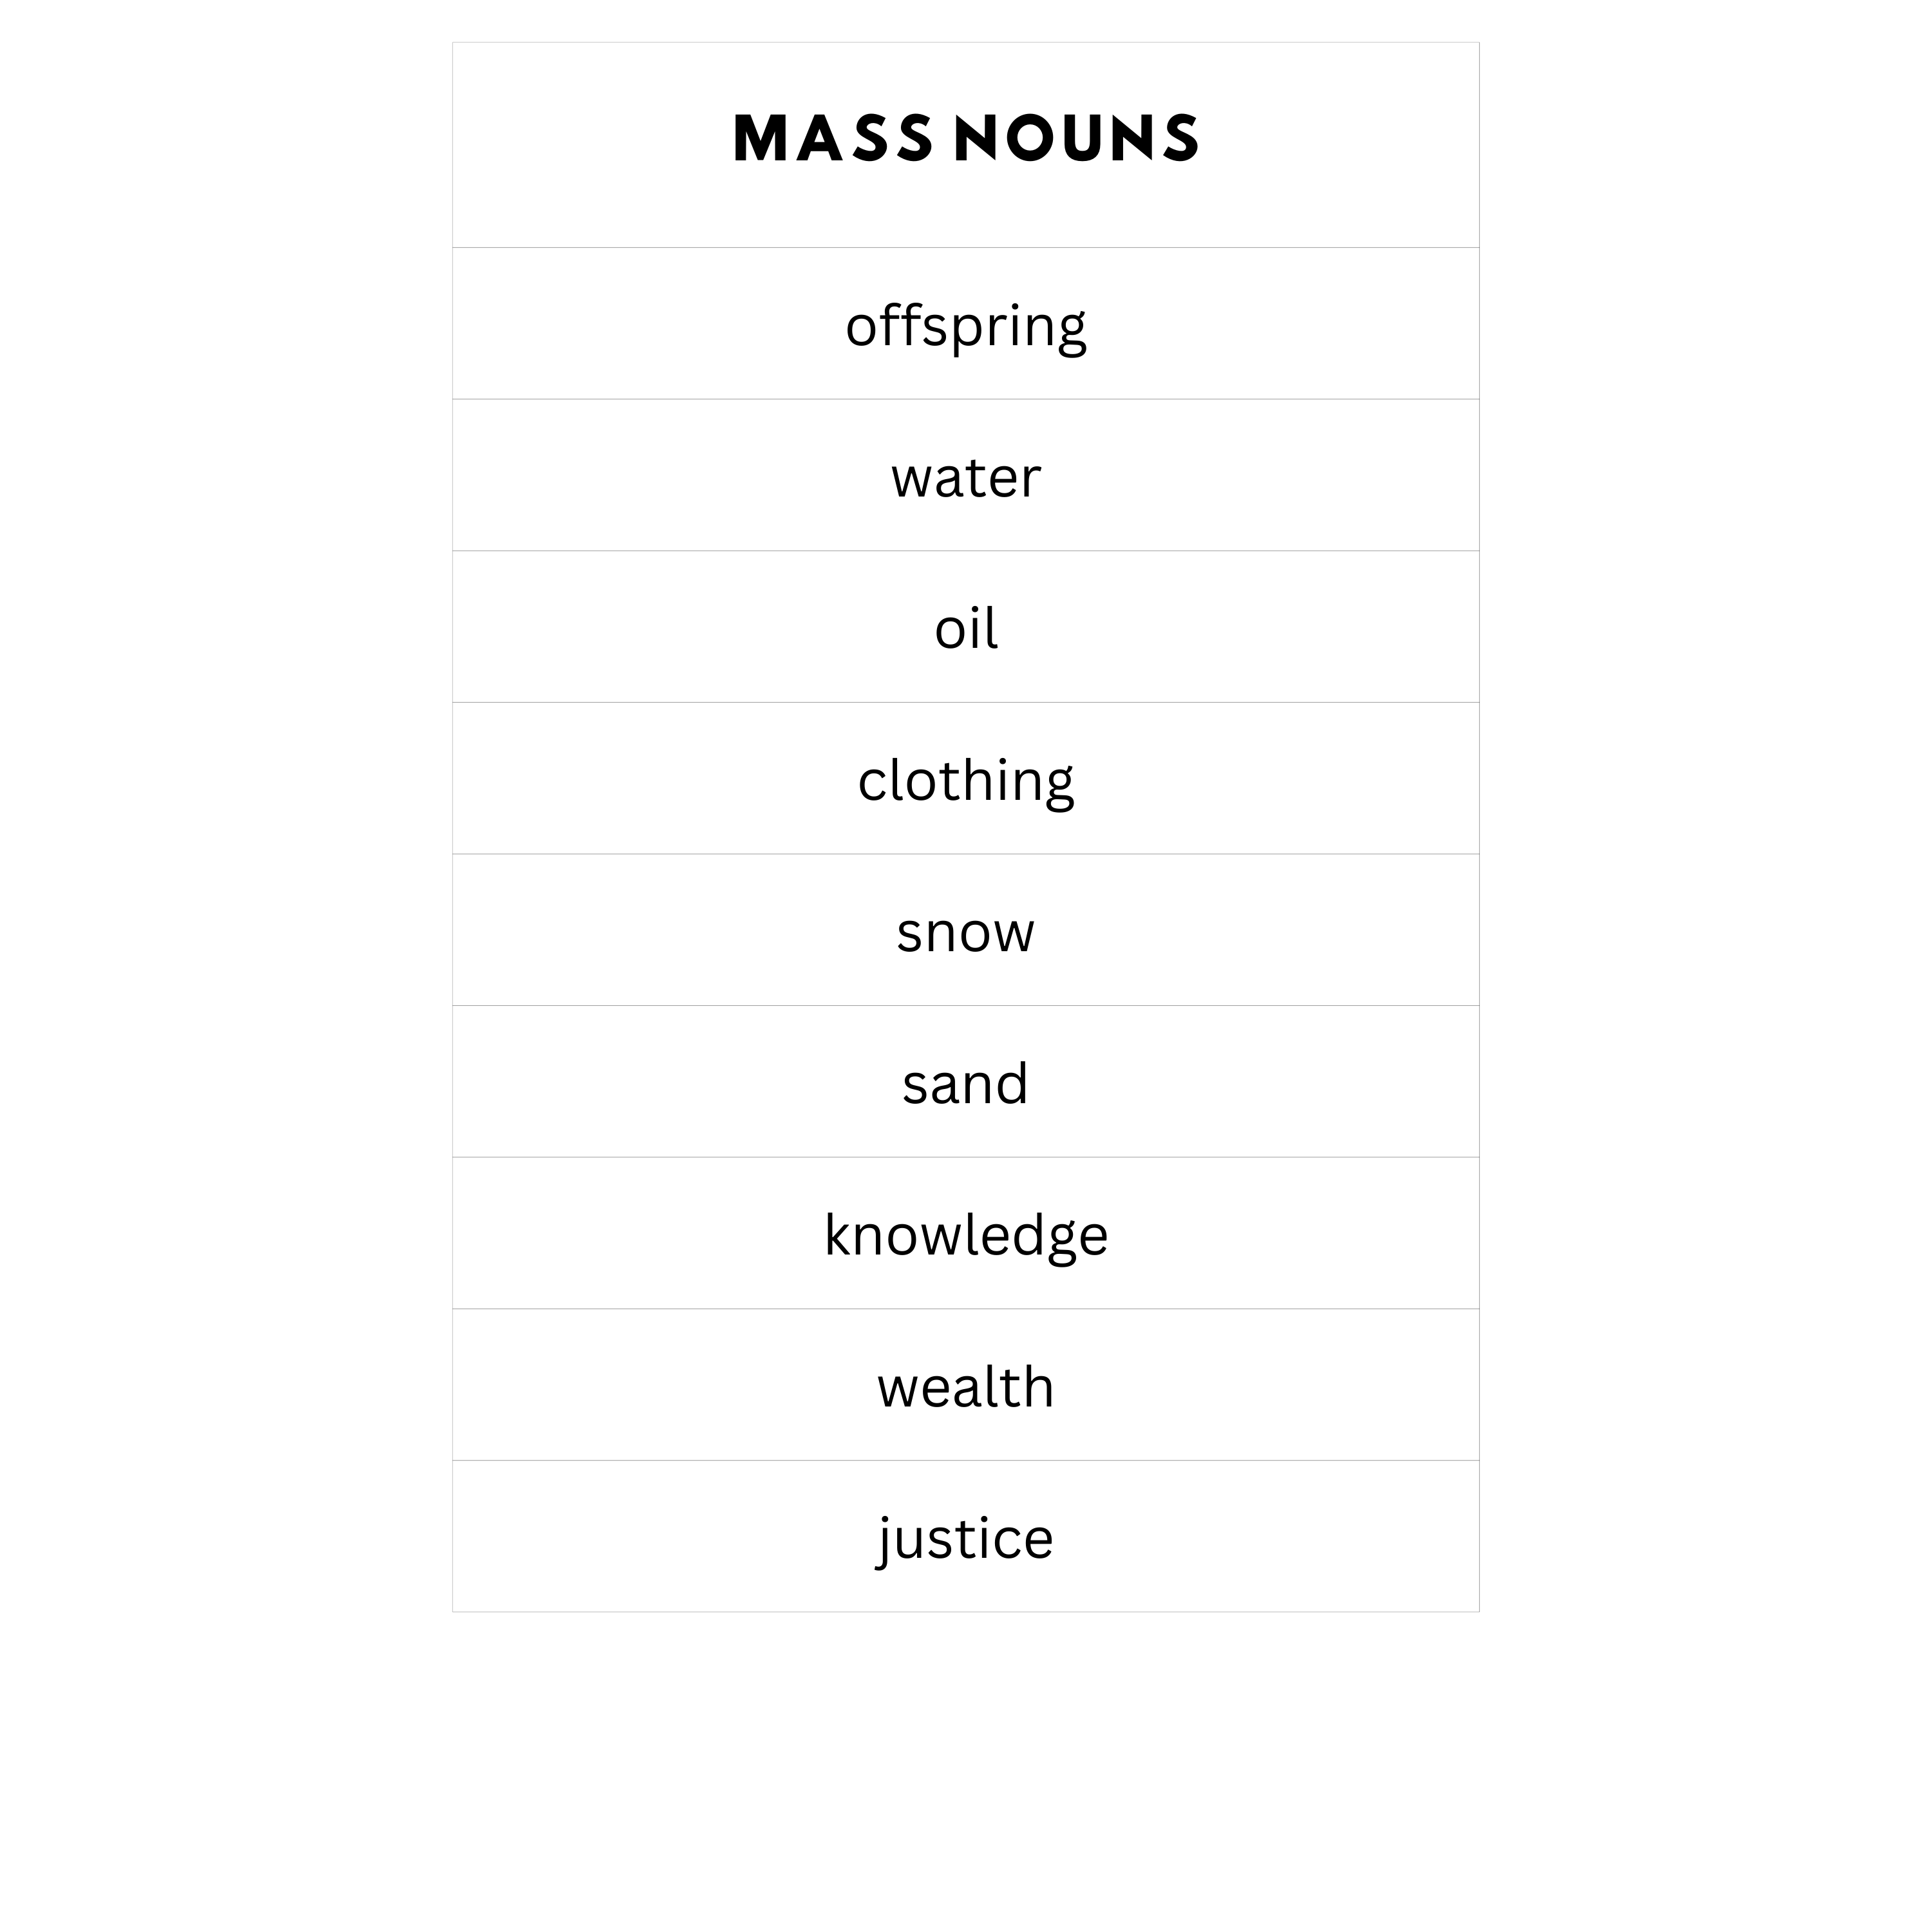 Non-count/singular-only nouns. By Gflex on Canva.